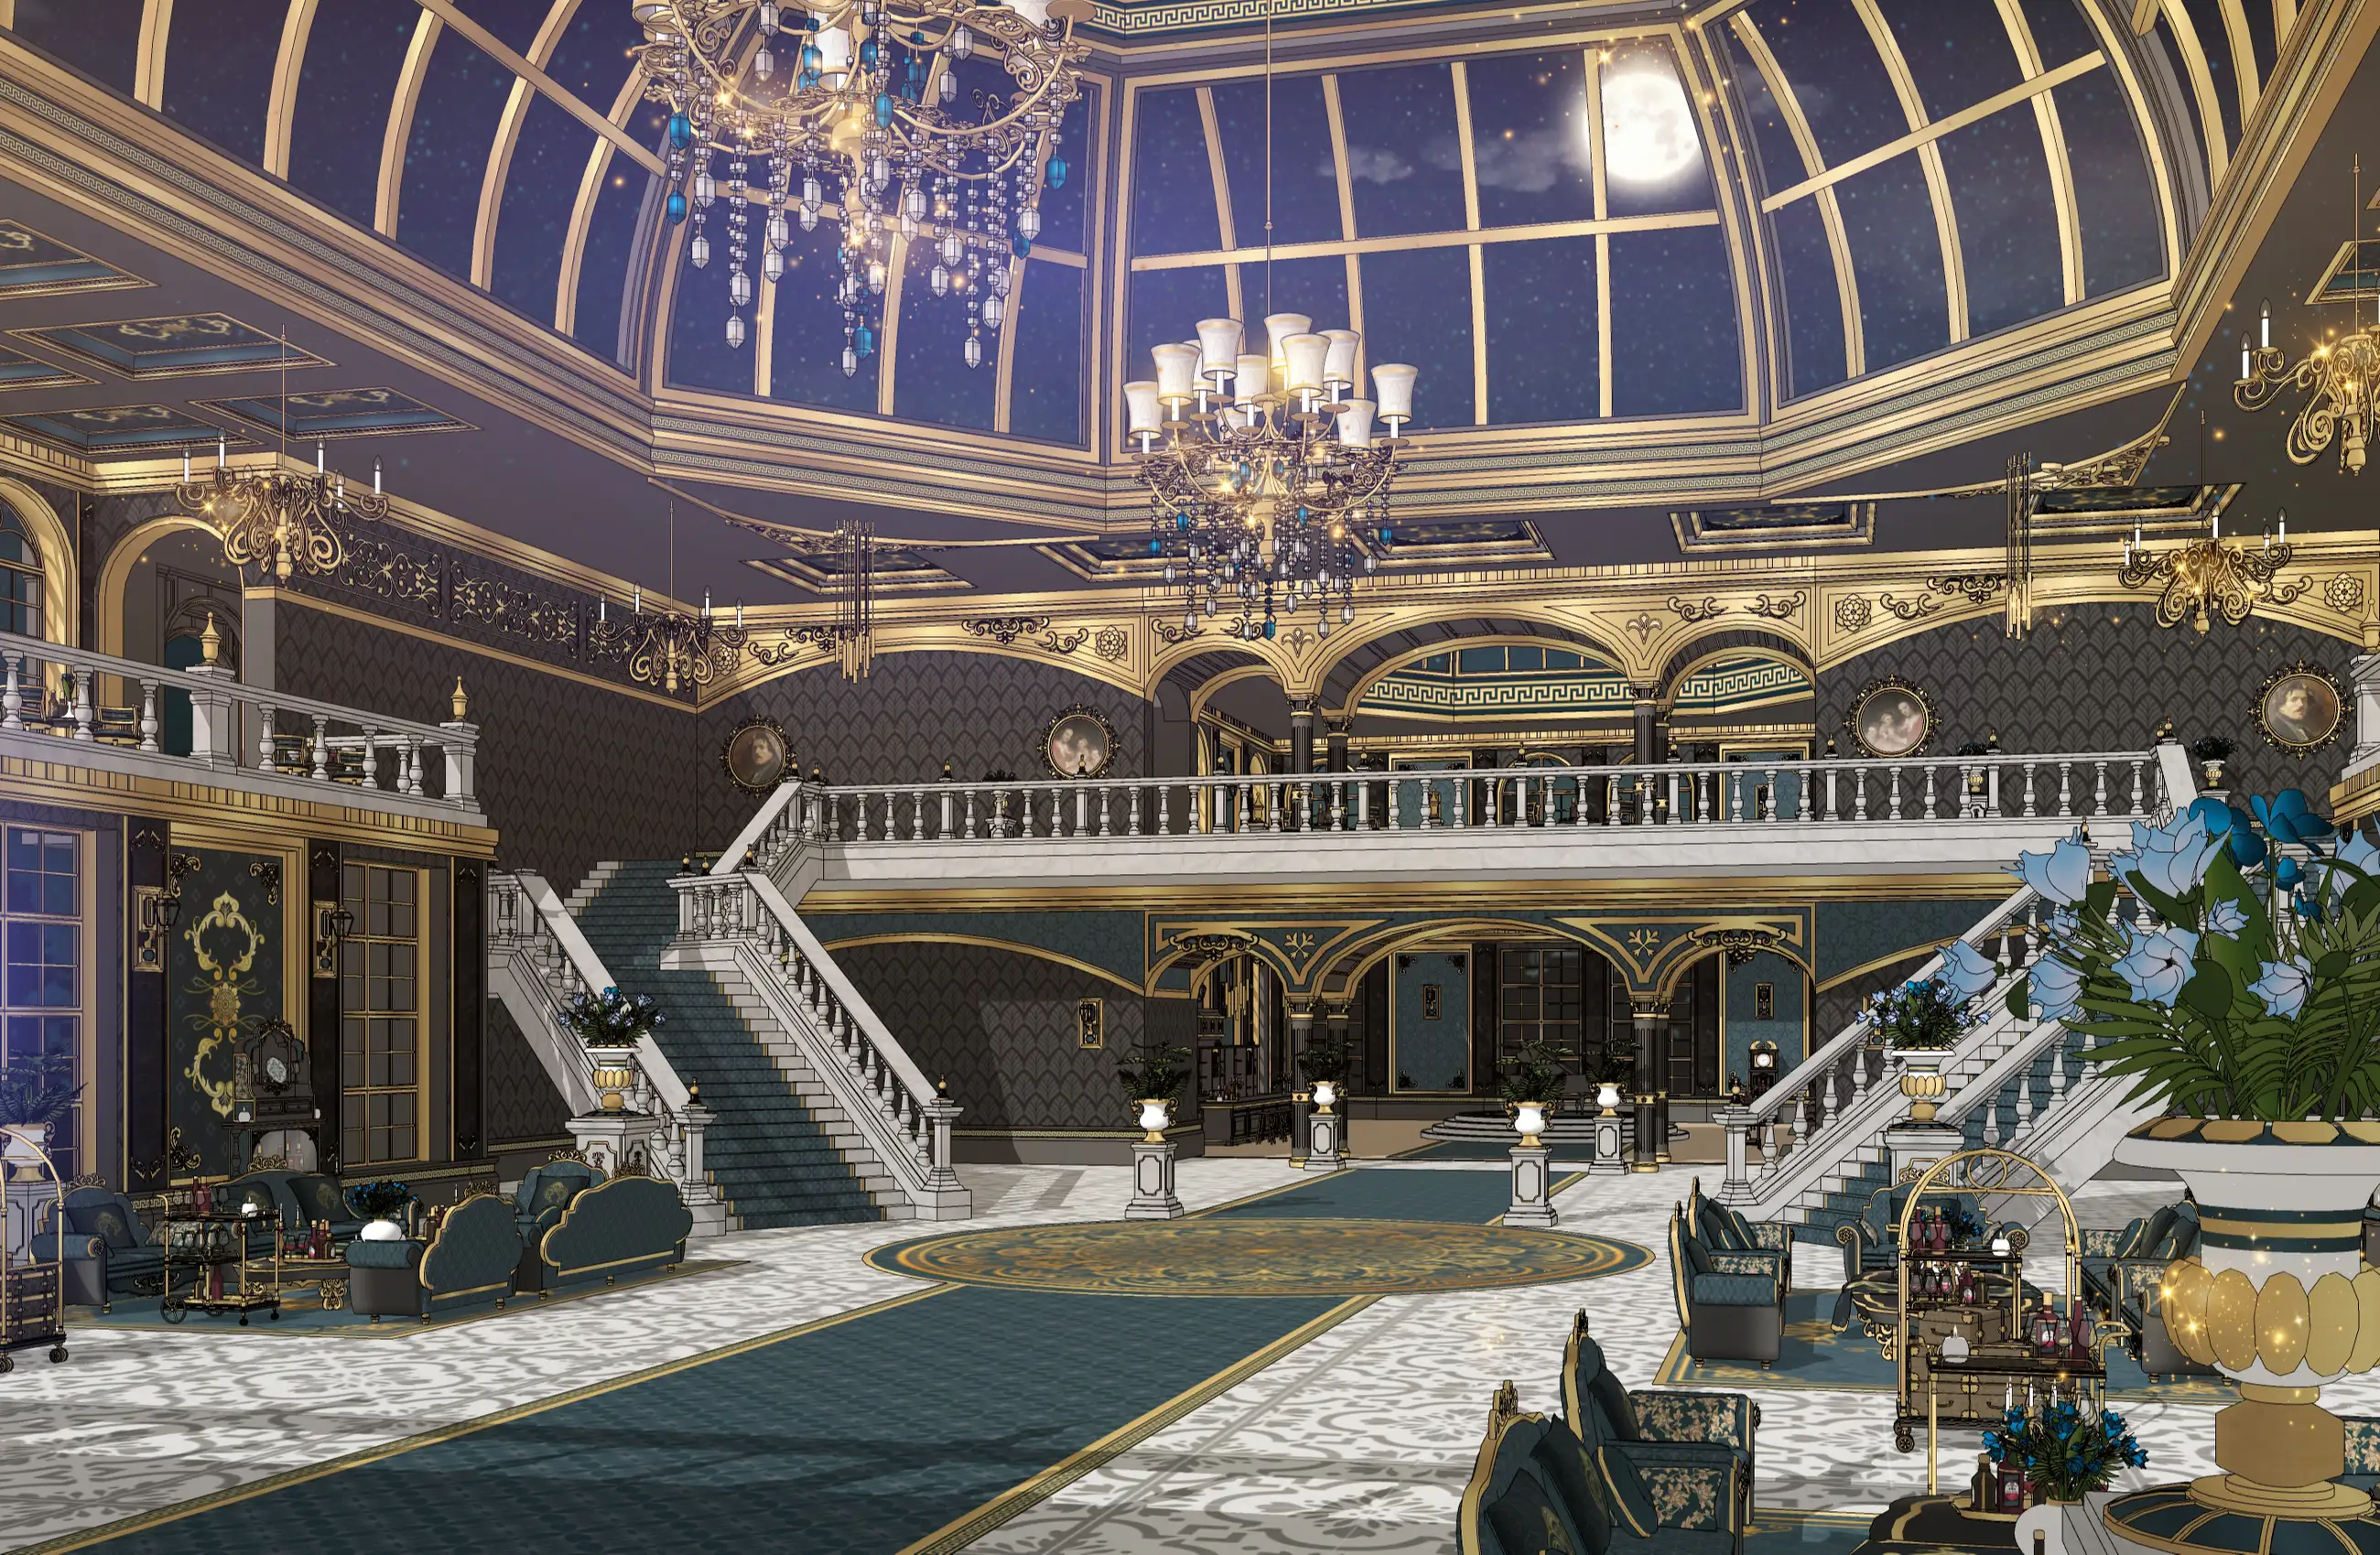 Black & Gold Lofan mansion that reminds me more and more - lobby